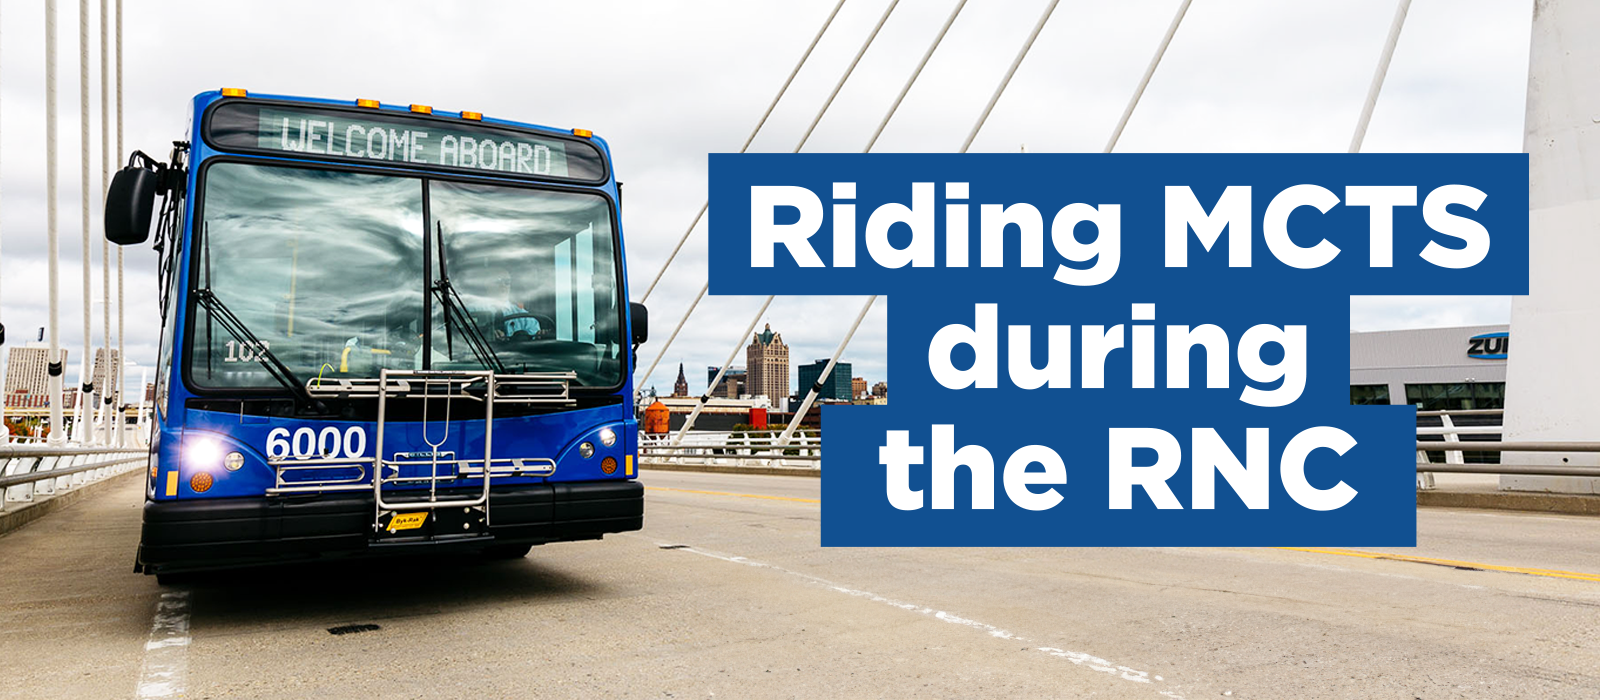 Riding MCTS During the RNC